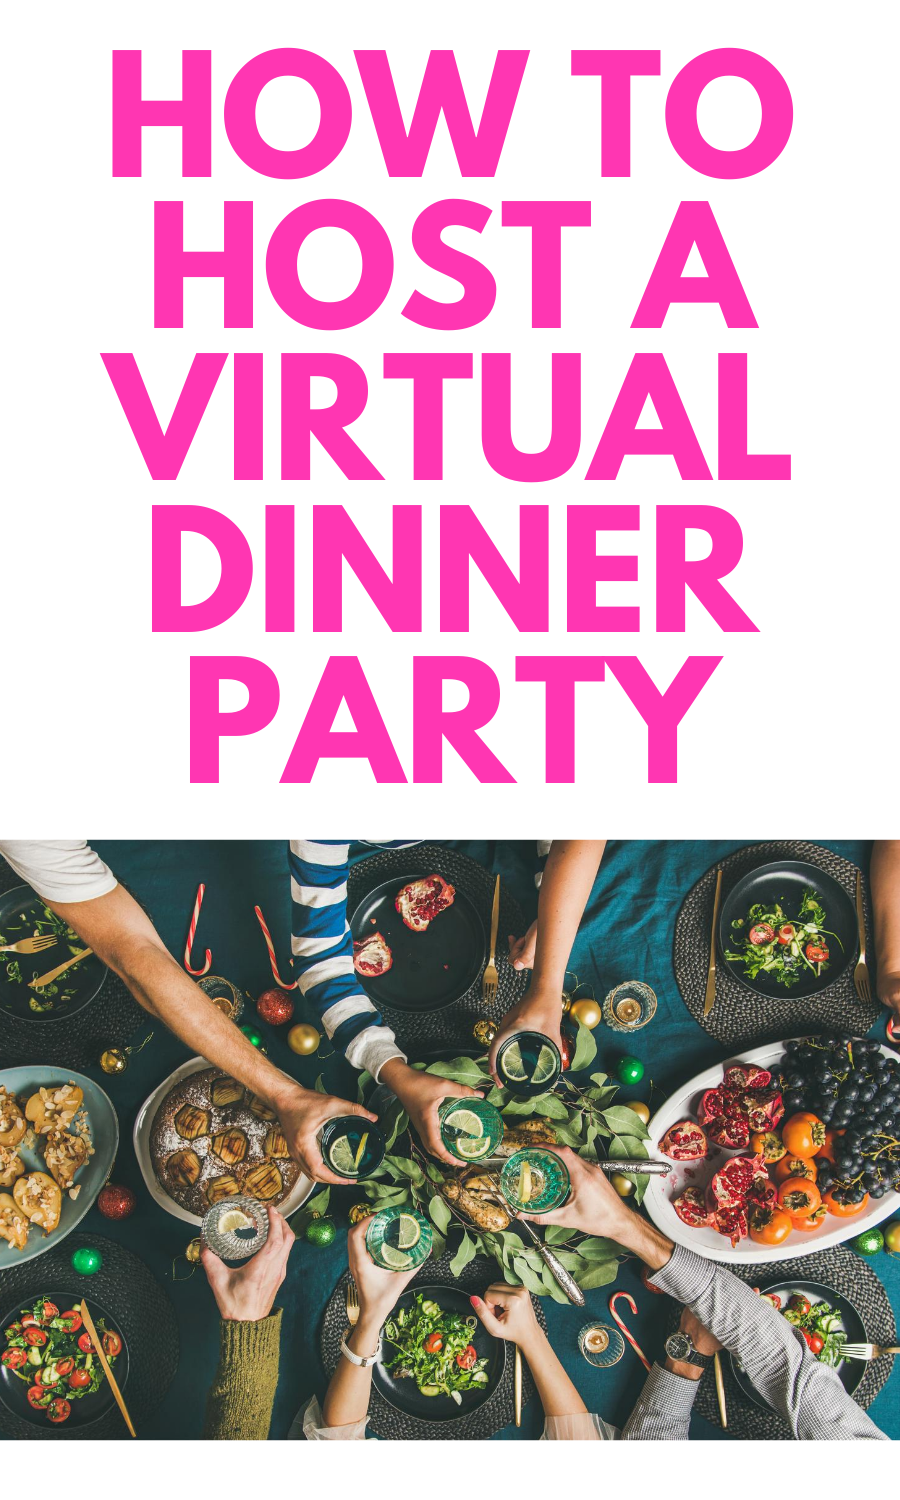 Virtual Dinner Party - How to Host One for Family and Friends - Stylish